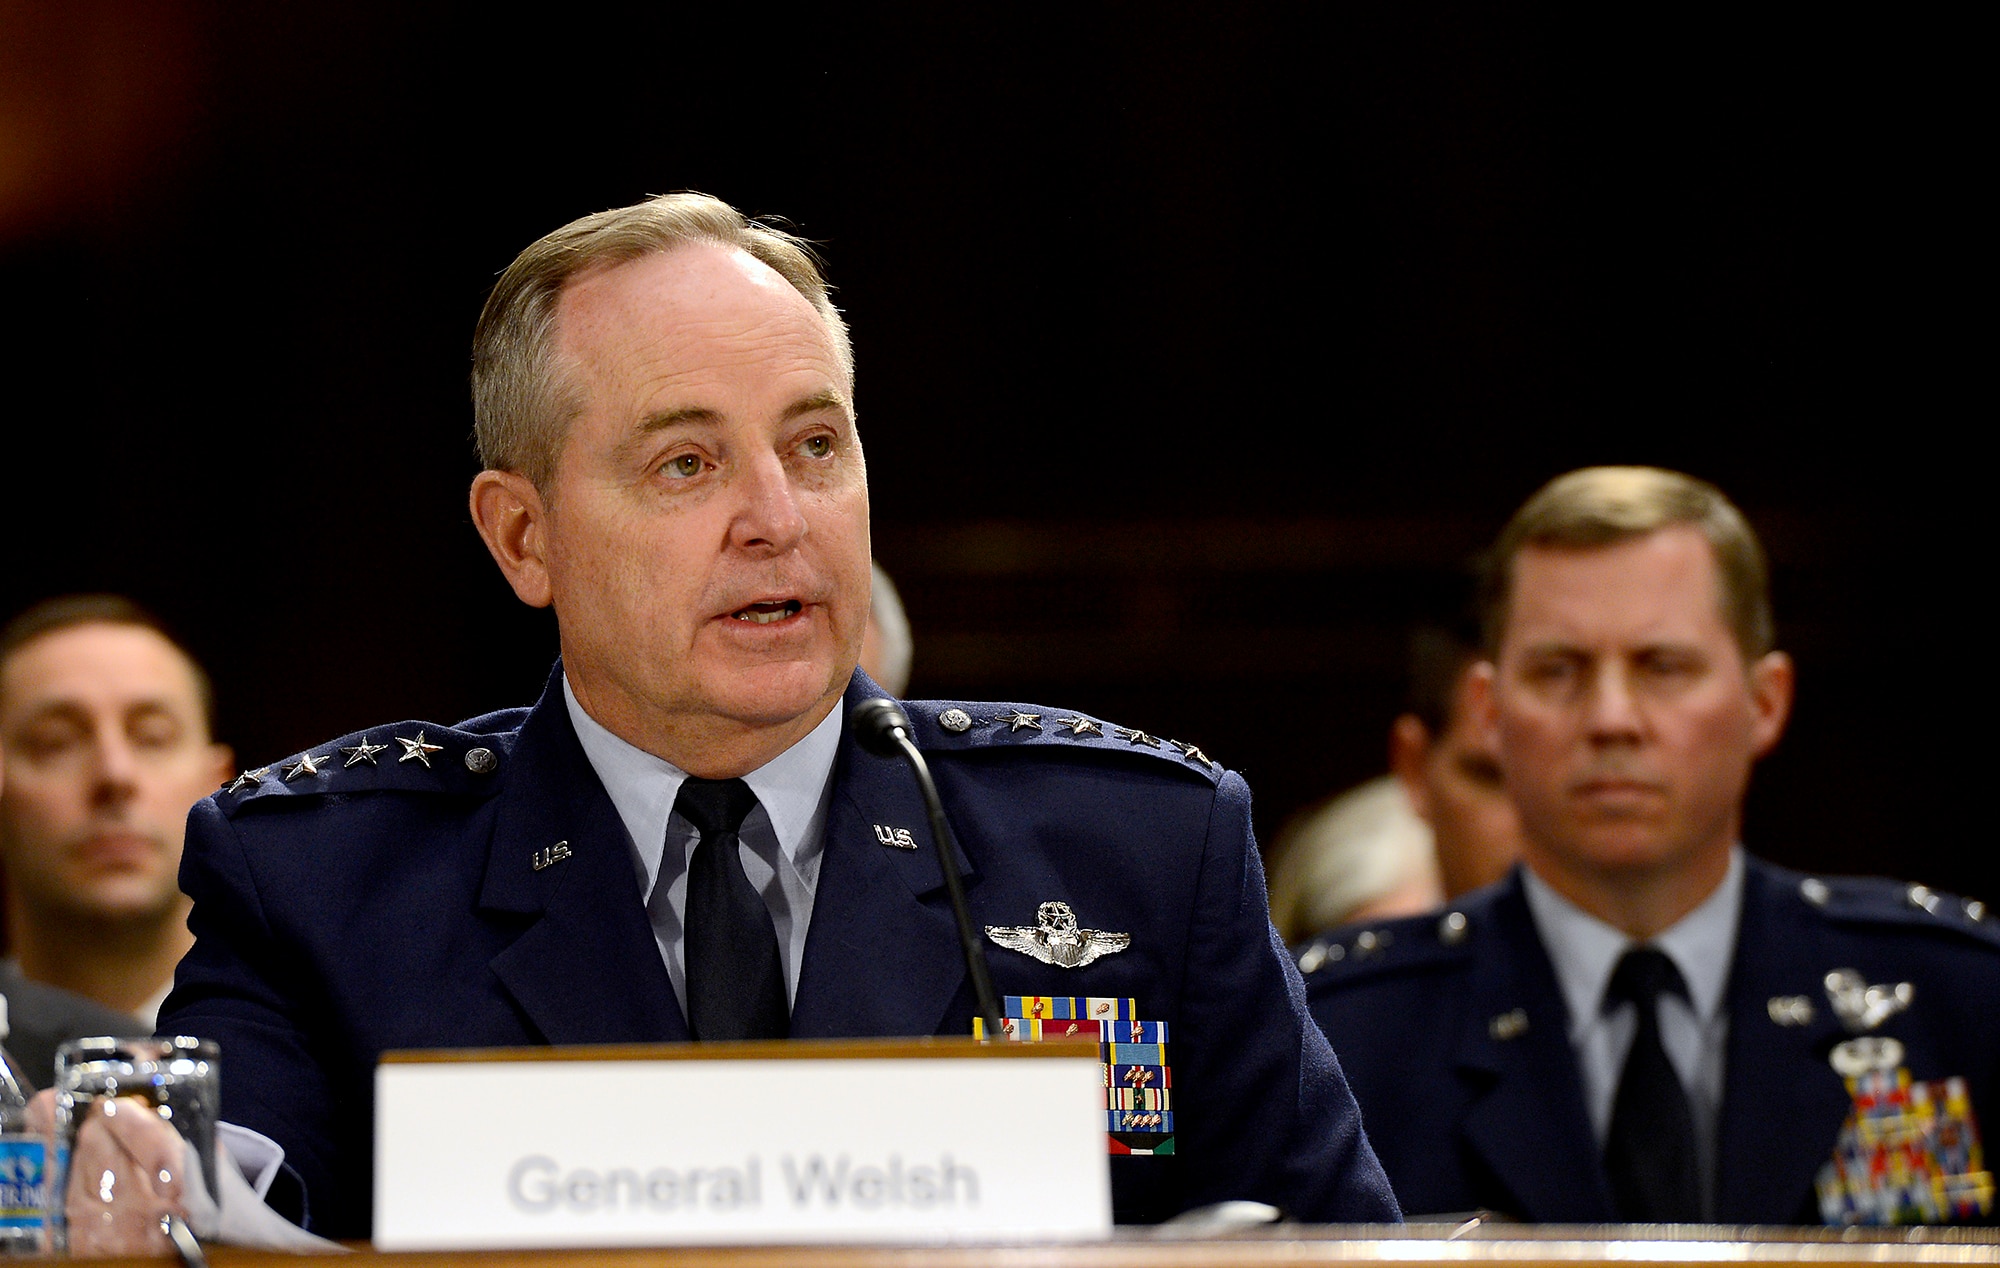 Air Force Chief of Staff Gen. Mark A. Welsh III testifies on the Air Force posture for fiscal year 2015 before the Senate Appropriations Committee on Defense, April 2, 2014, in Washington, D.C.  Also testifying were Secretary of the Air Force Deborah Lee James; Gen. James "JJ" Jackson, the Air Force Reserve chief; Gen. Frank J. Grass, the National Guard bureau chief; and Lt. Gen. Stanley E. Clarke III, the Air National Guard director.  (U.S. Air Force photo/Scott M. Ash)